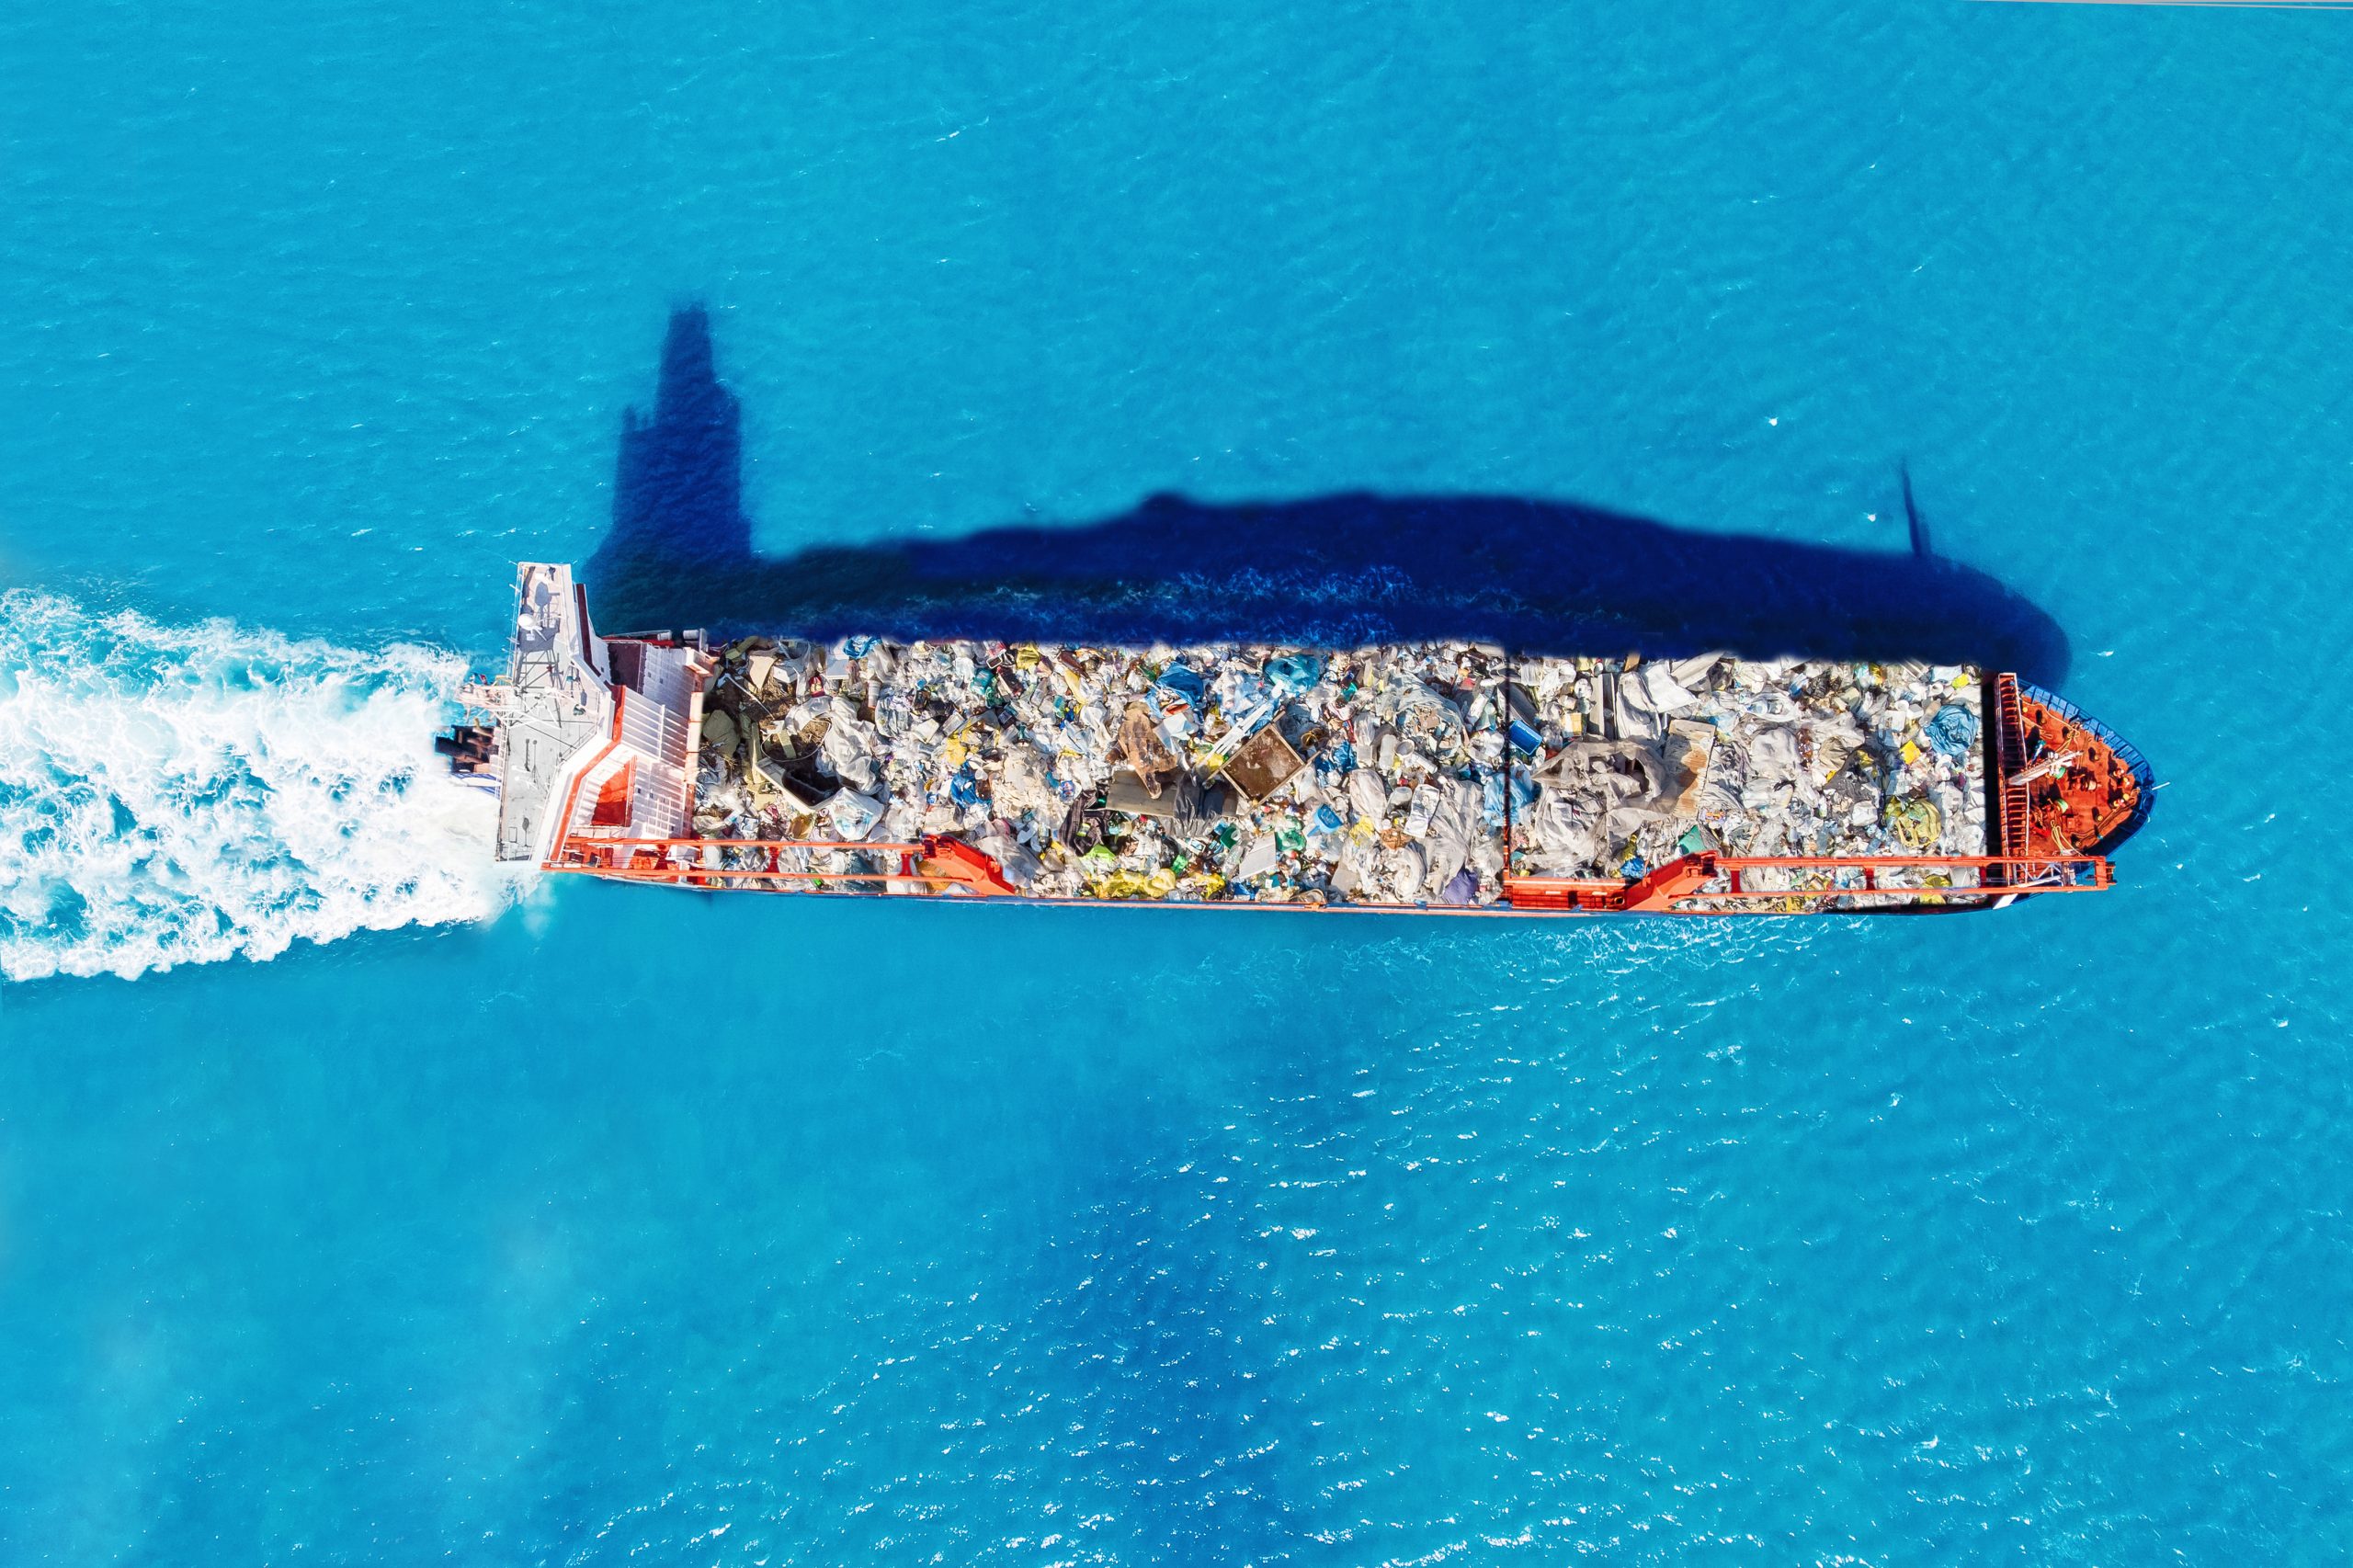 Ship with cargo waste